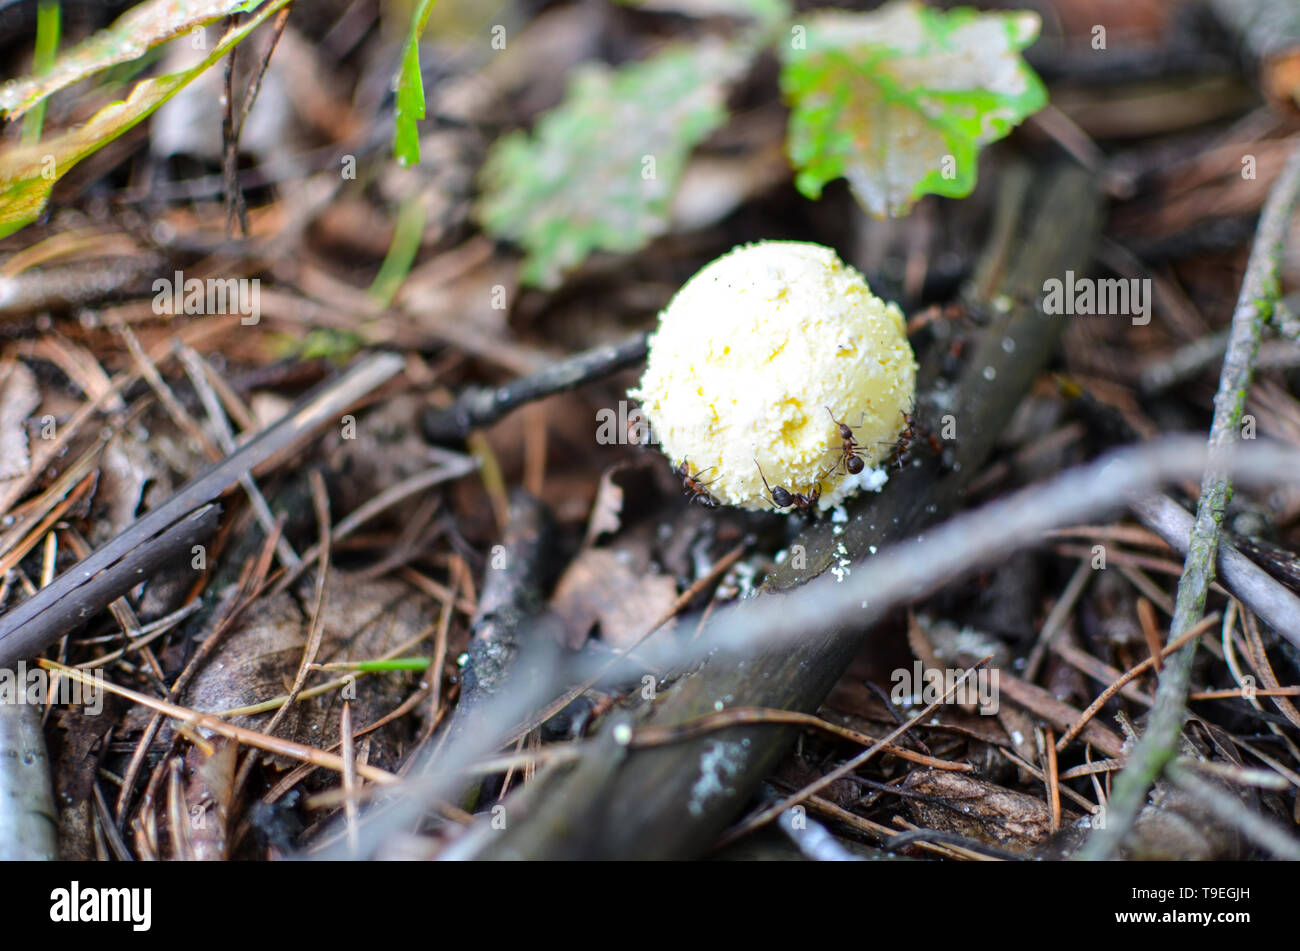 Mushroom called scleroderma bovista in the forest with sticks Stock Photo